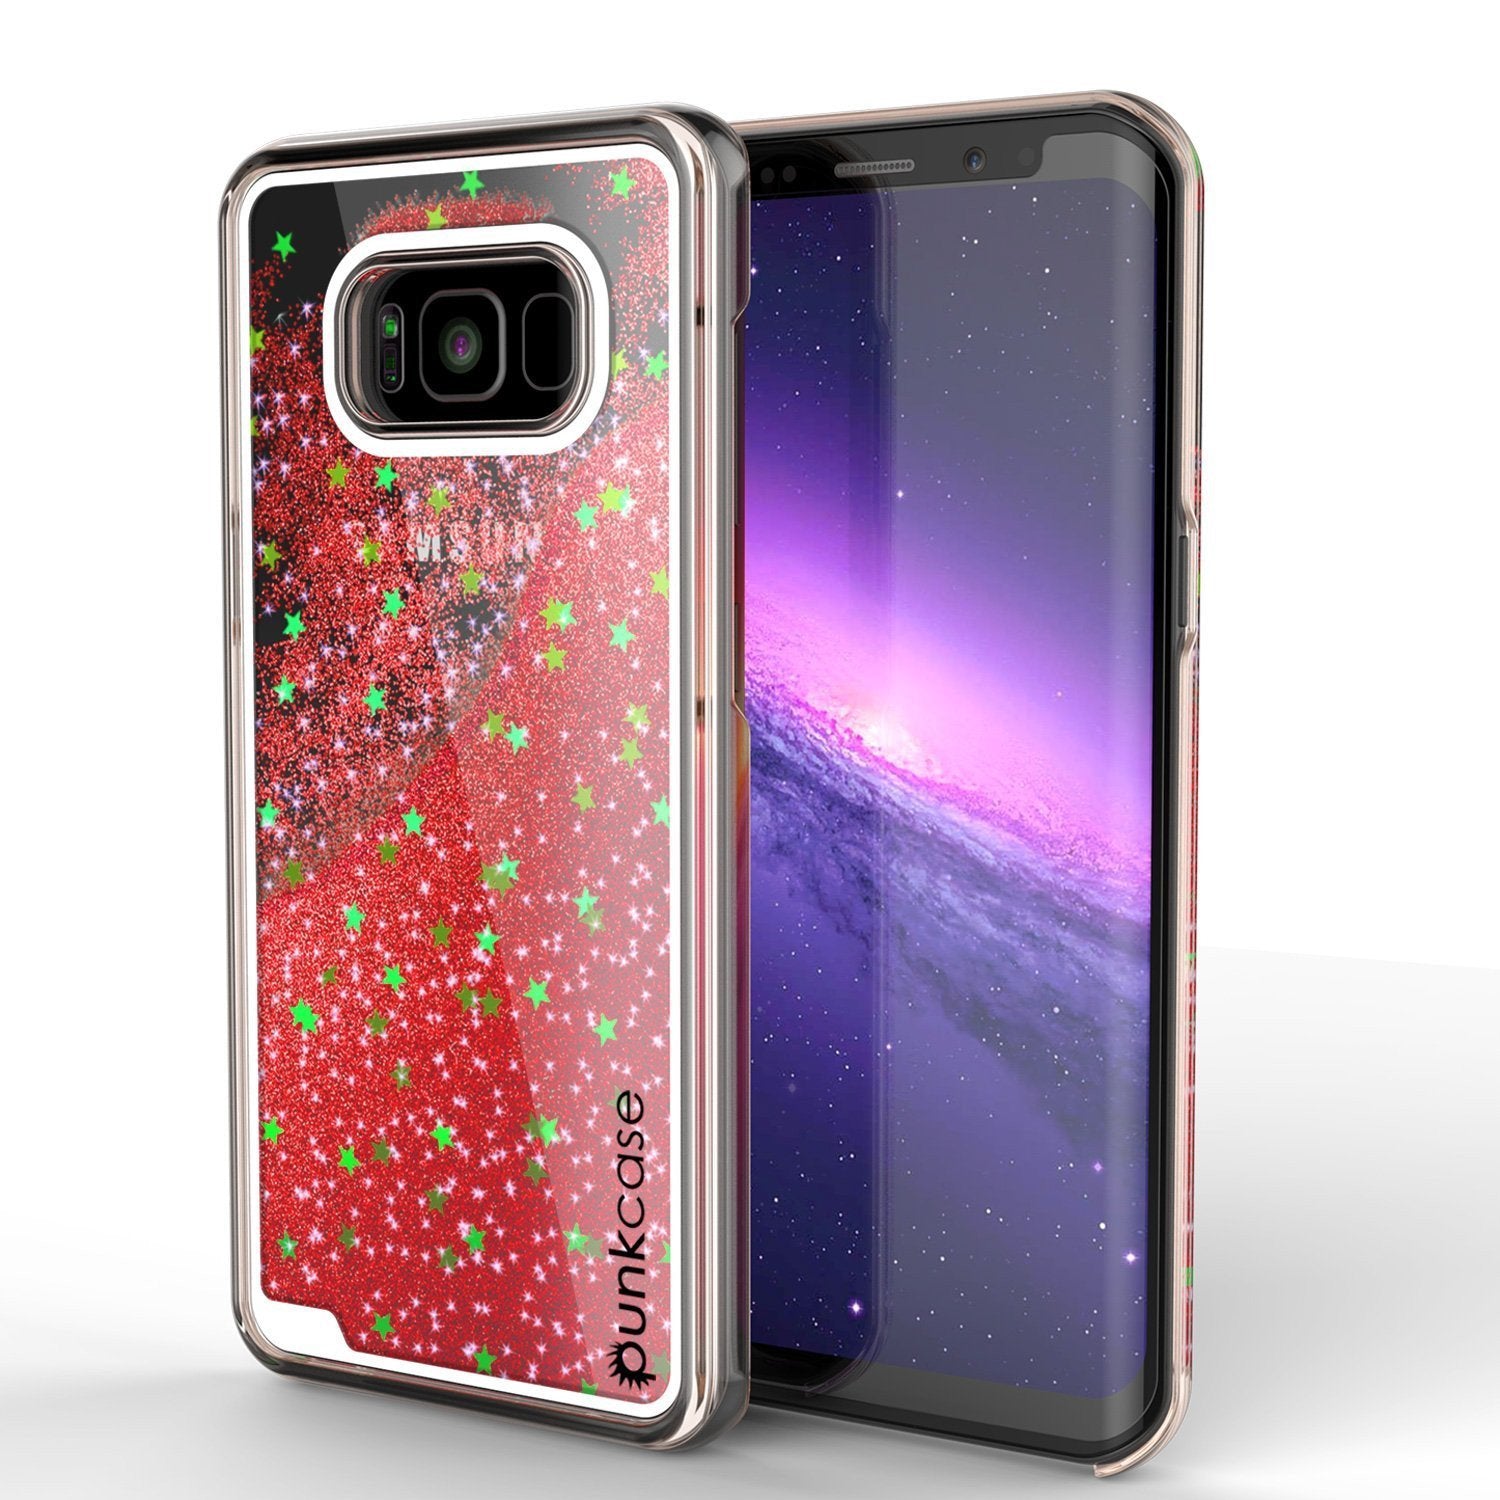 S8 Plus Case, Punkcase Liquid Red Series Protective Dual Layer Floating Glitter Cover